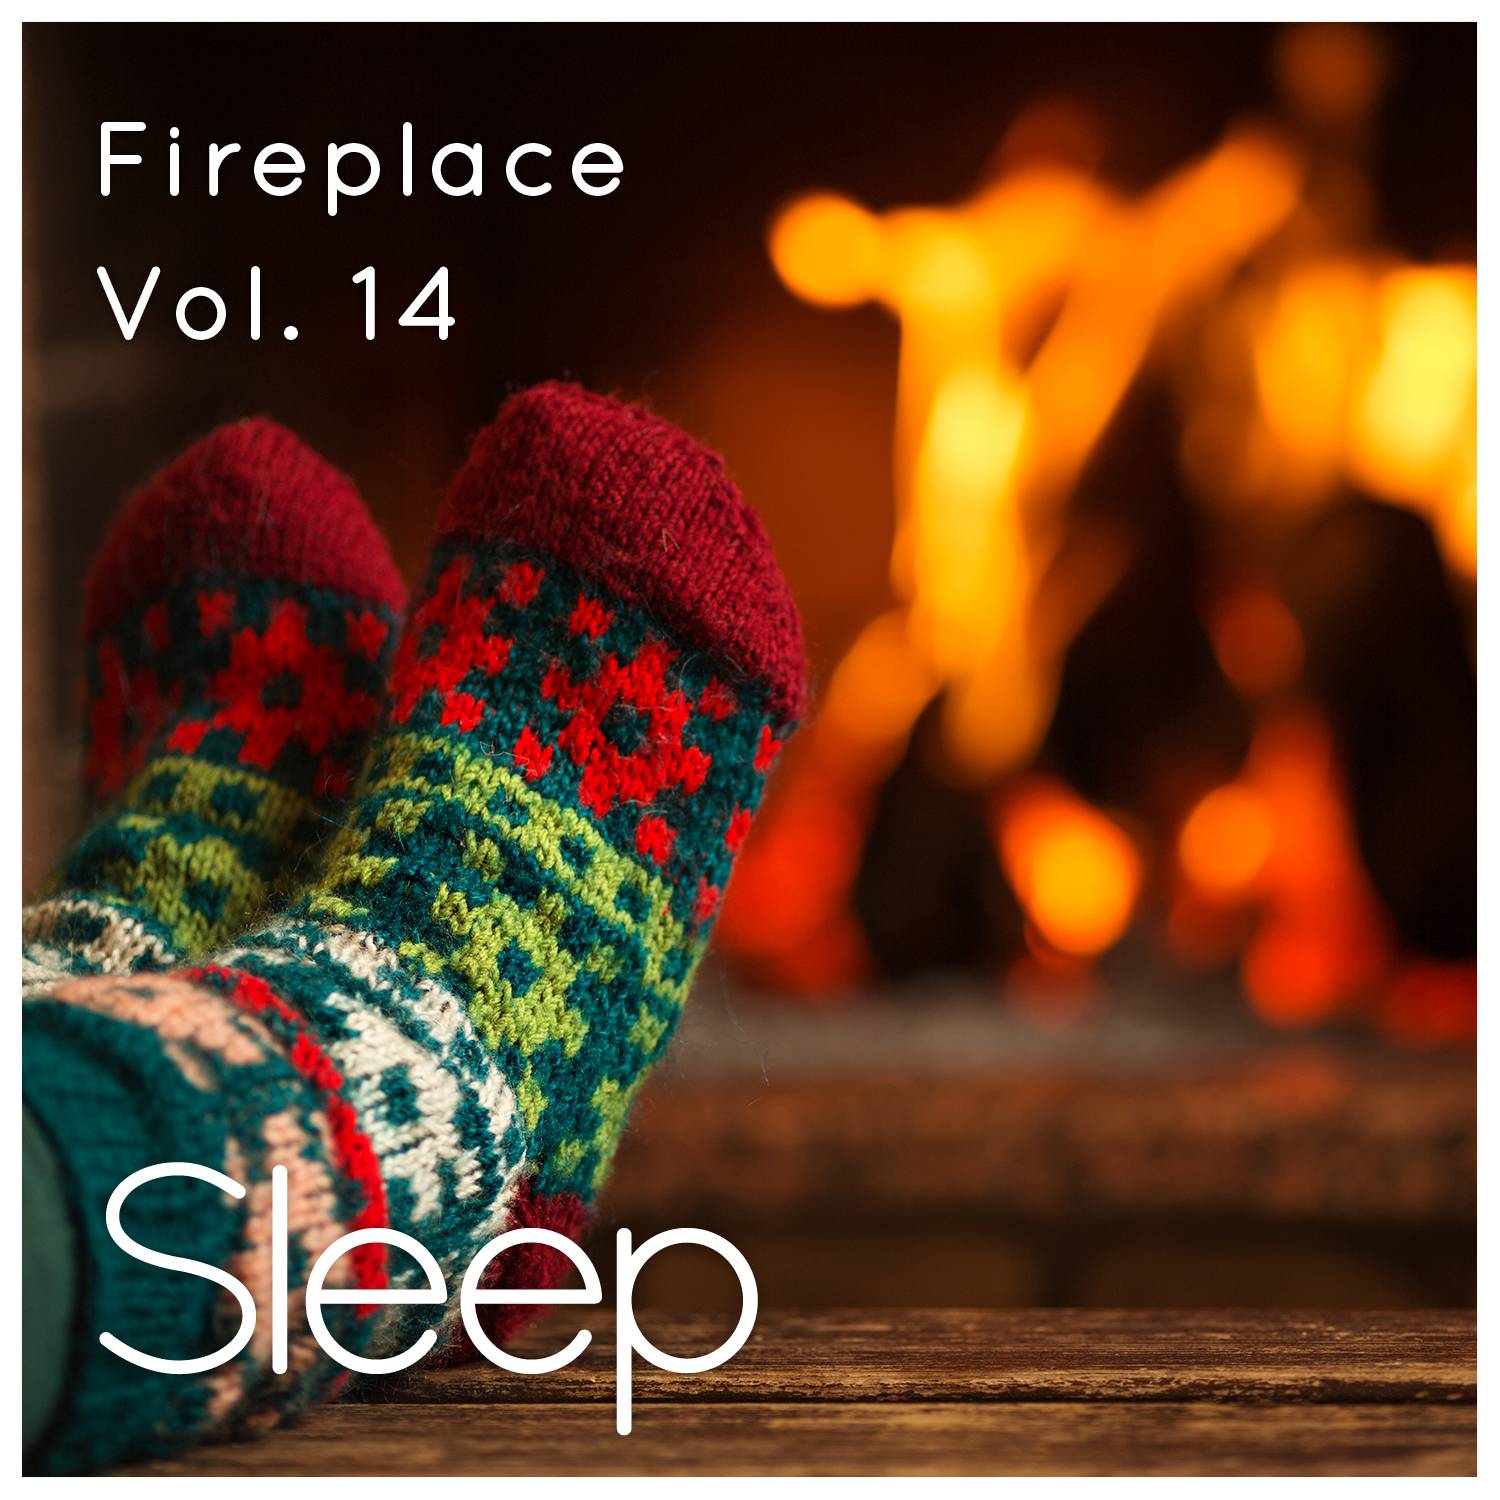 Sleep by Fireplace in Cabin, Vol. 14